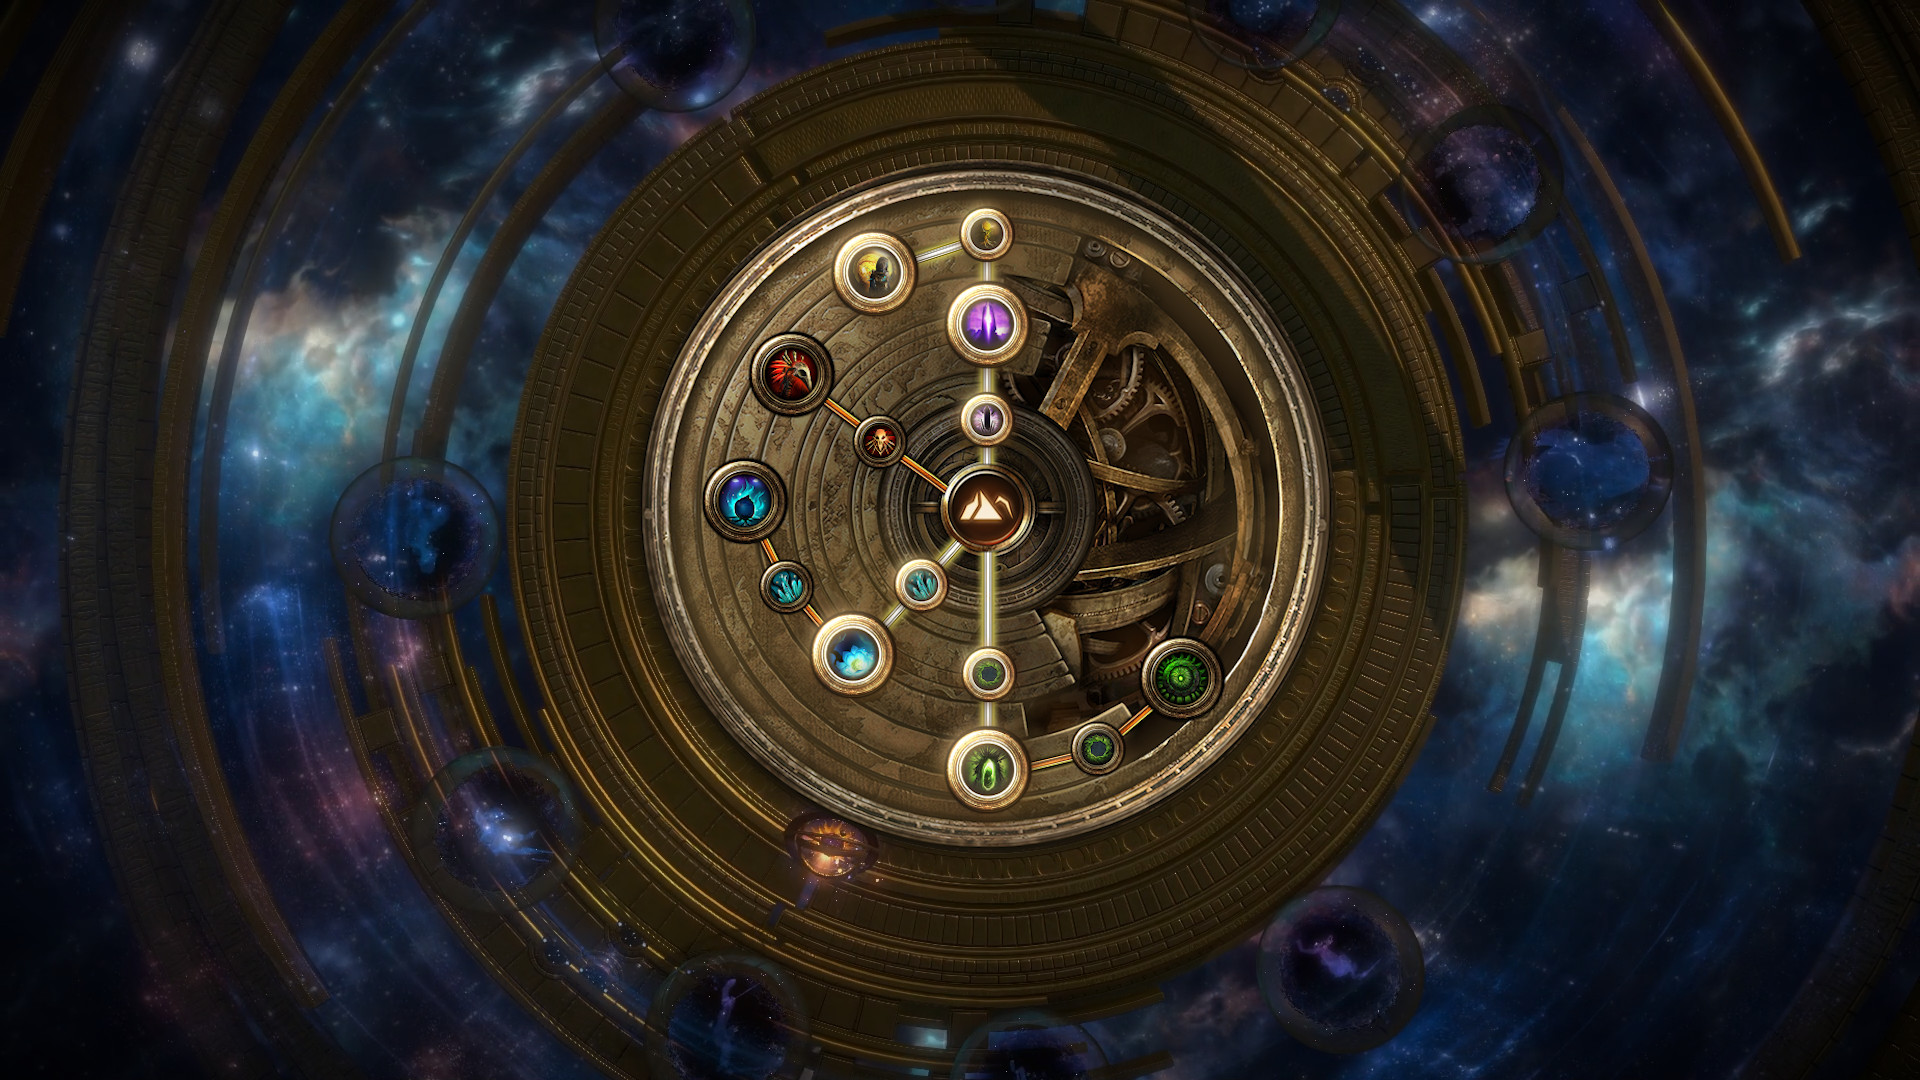 The Next Expansion For Path Of Exile Is Echoes Of The Atlas